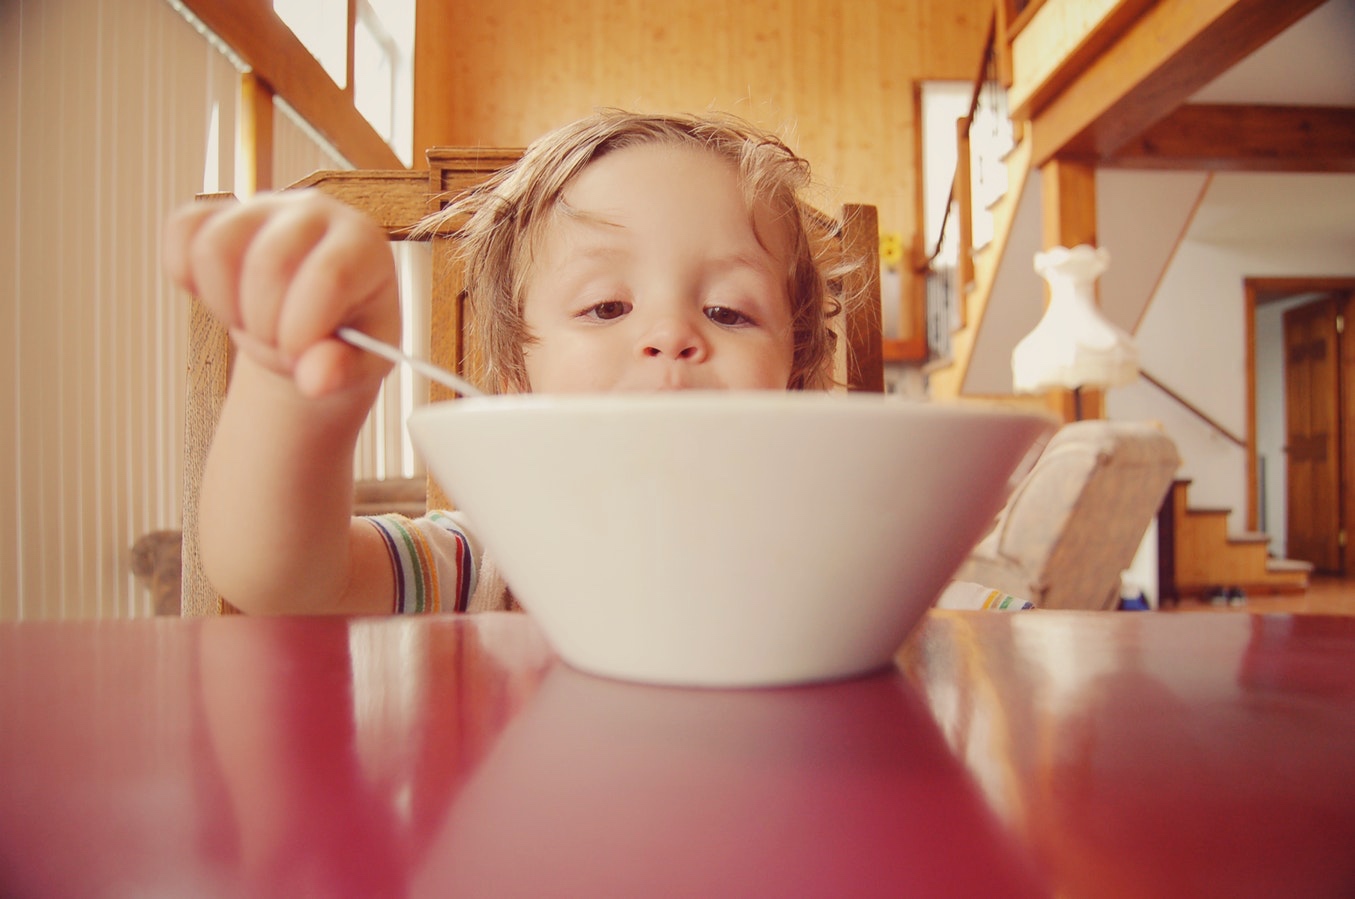 Tasty (and healthy) snack ideas for kids